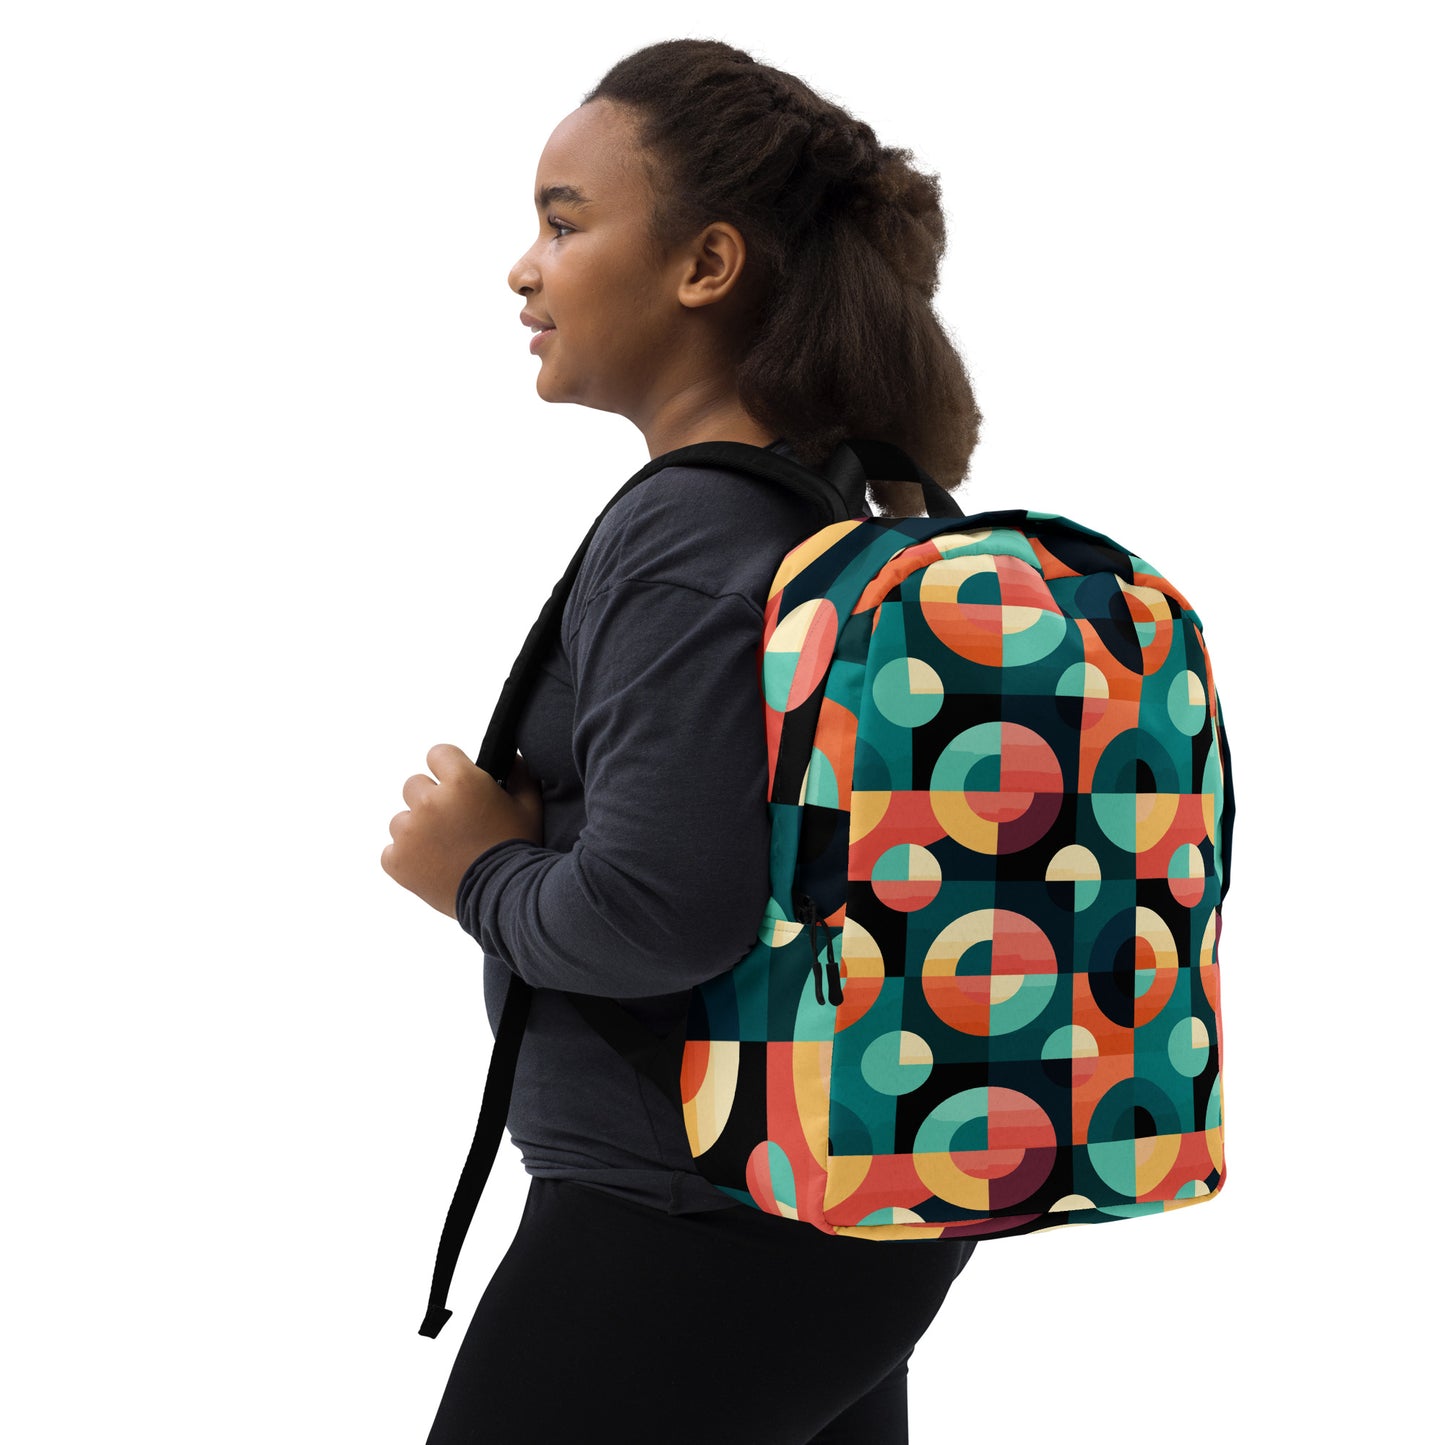 Rounders backpack